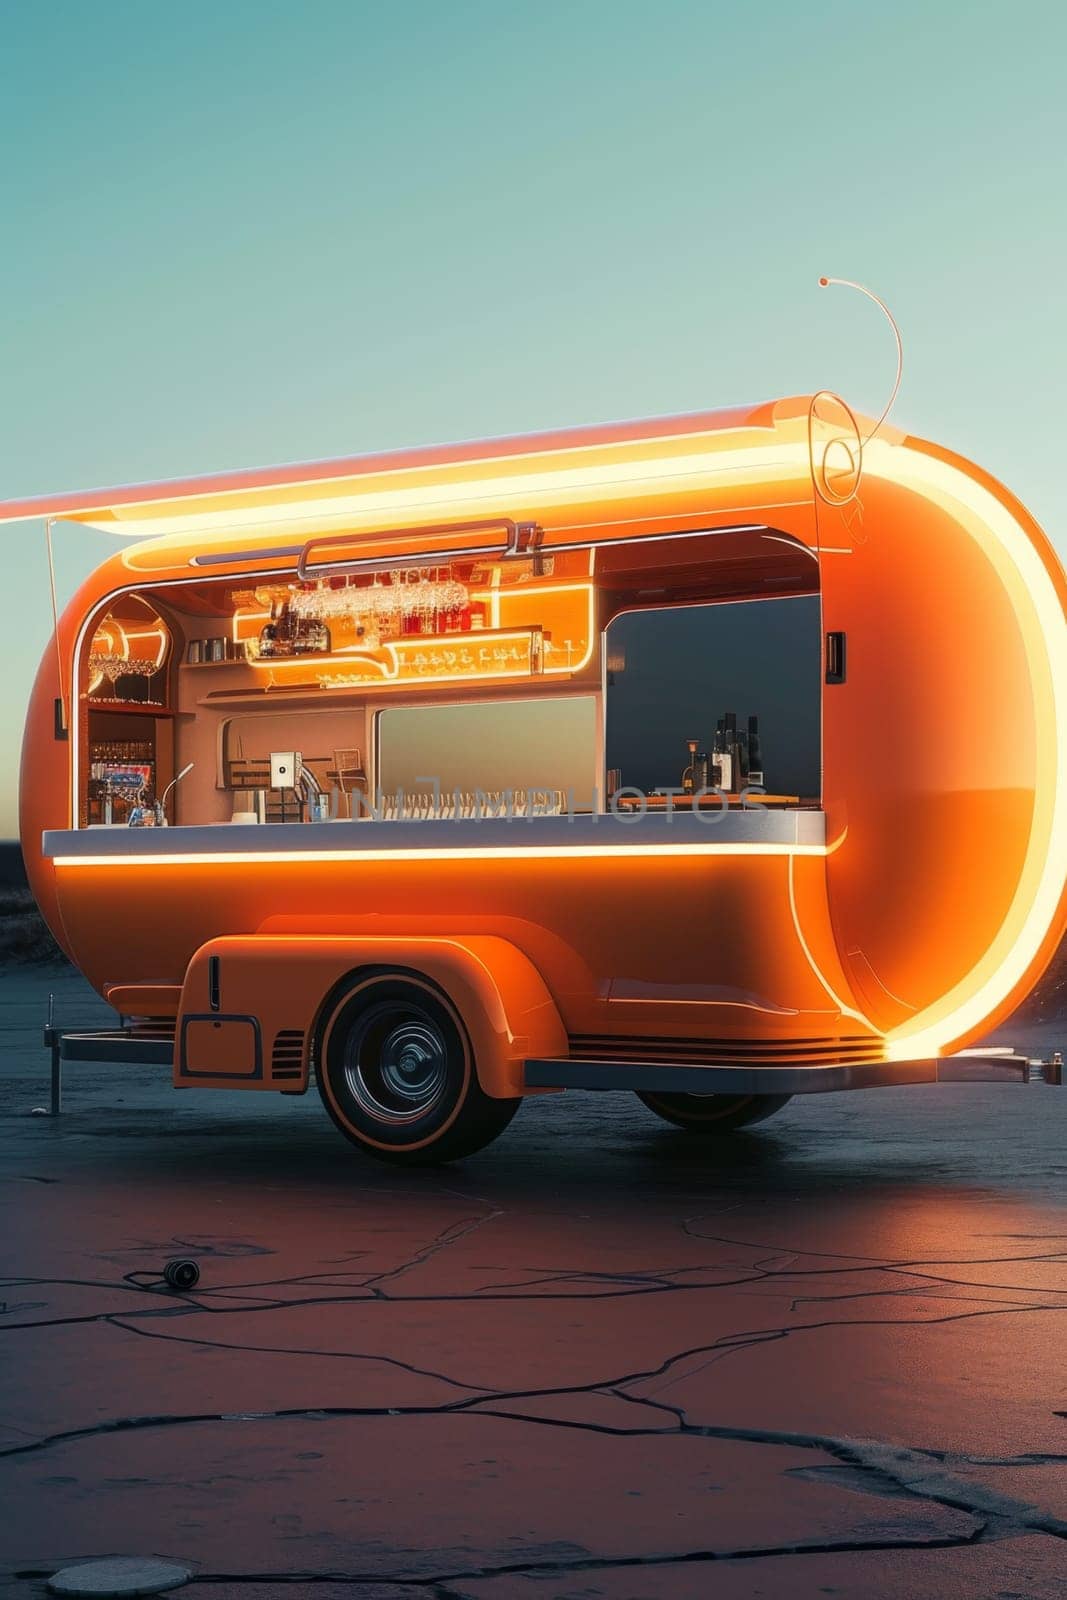 A car with food in a futuristic design. The concept of the future. 3D illustration by Lobachad